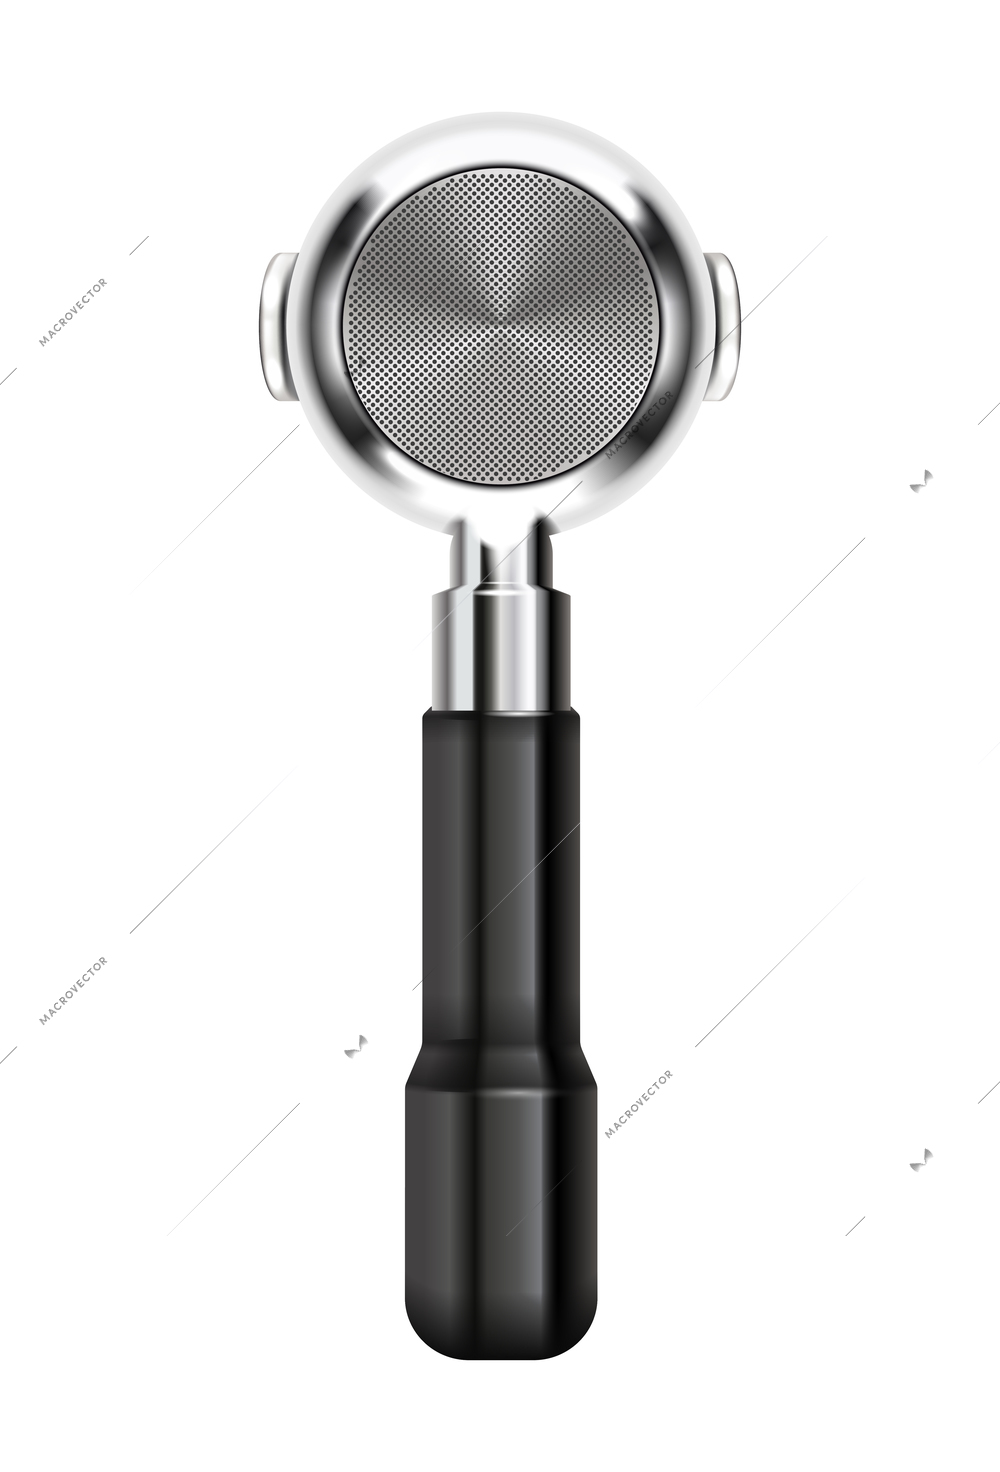 Clean stainless steel portafilter for coffee realistic icon vector illustration